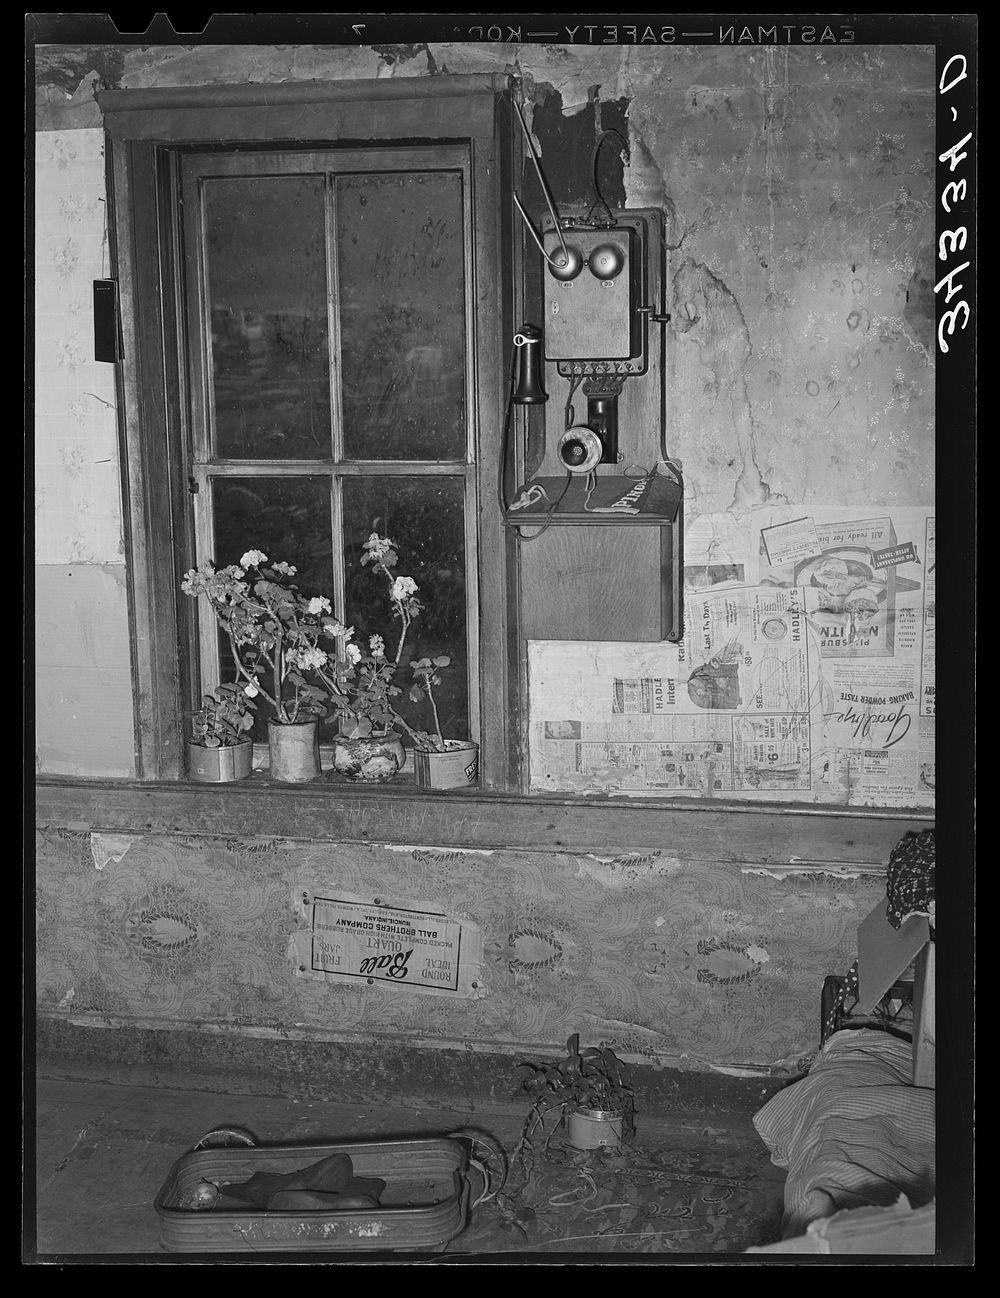 Telephone by window in farm home of FSA (Farm Security Administration) client near Bradford, Vermont. Orange County by…